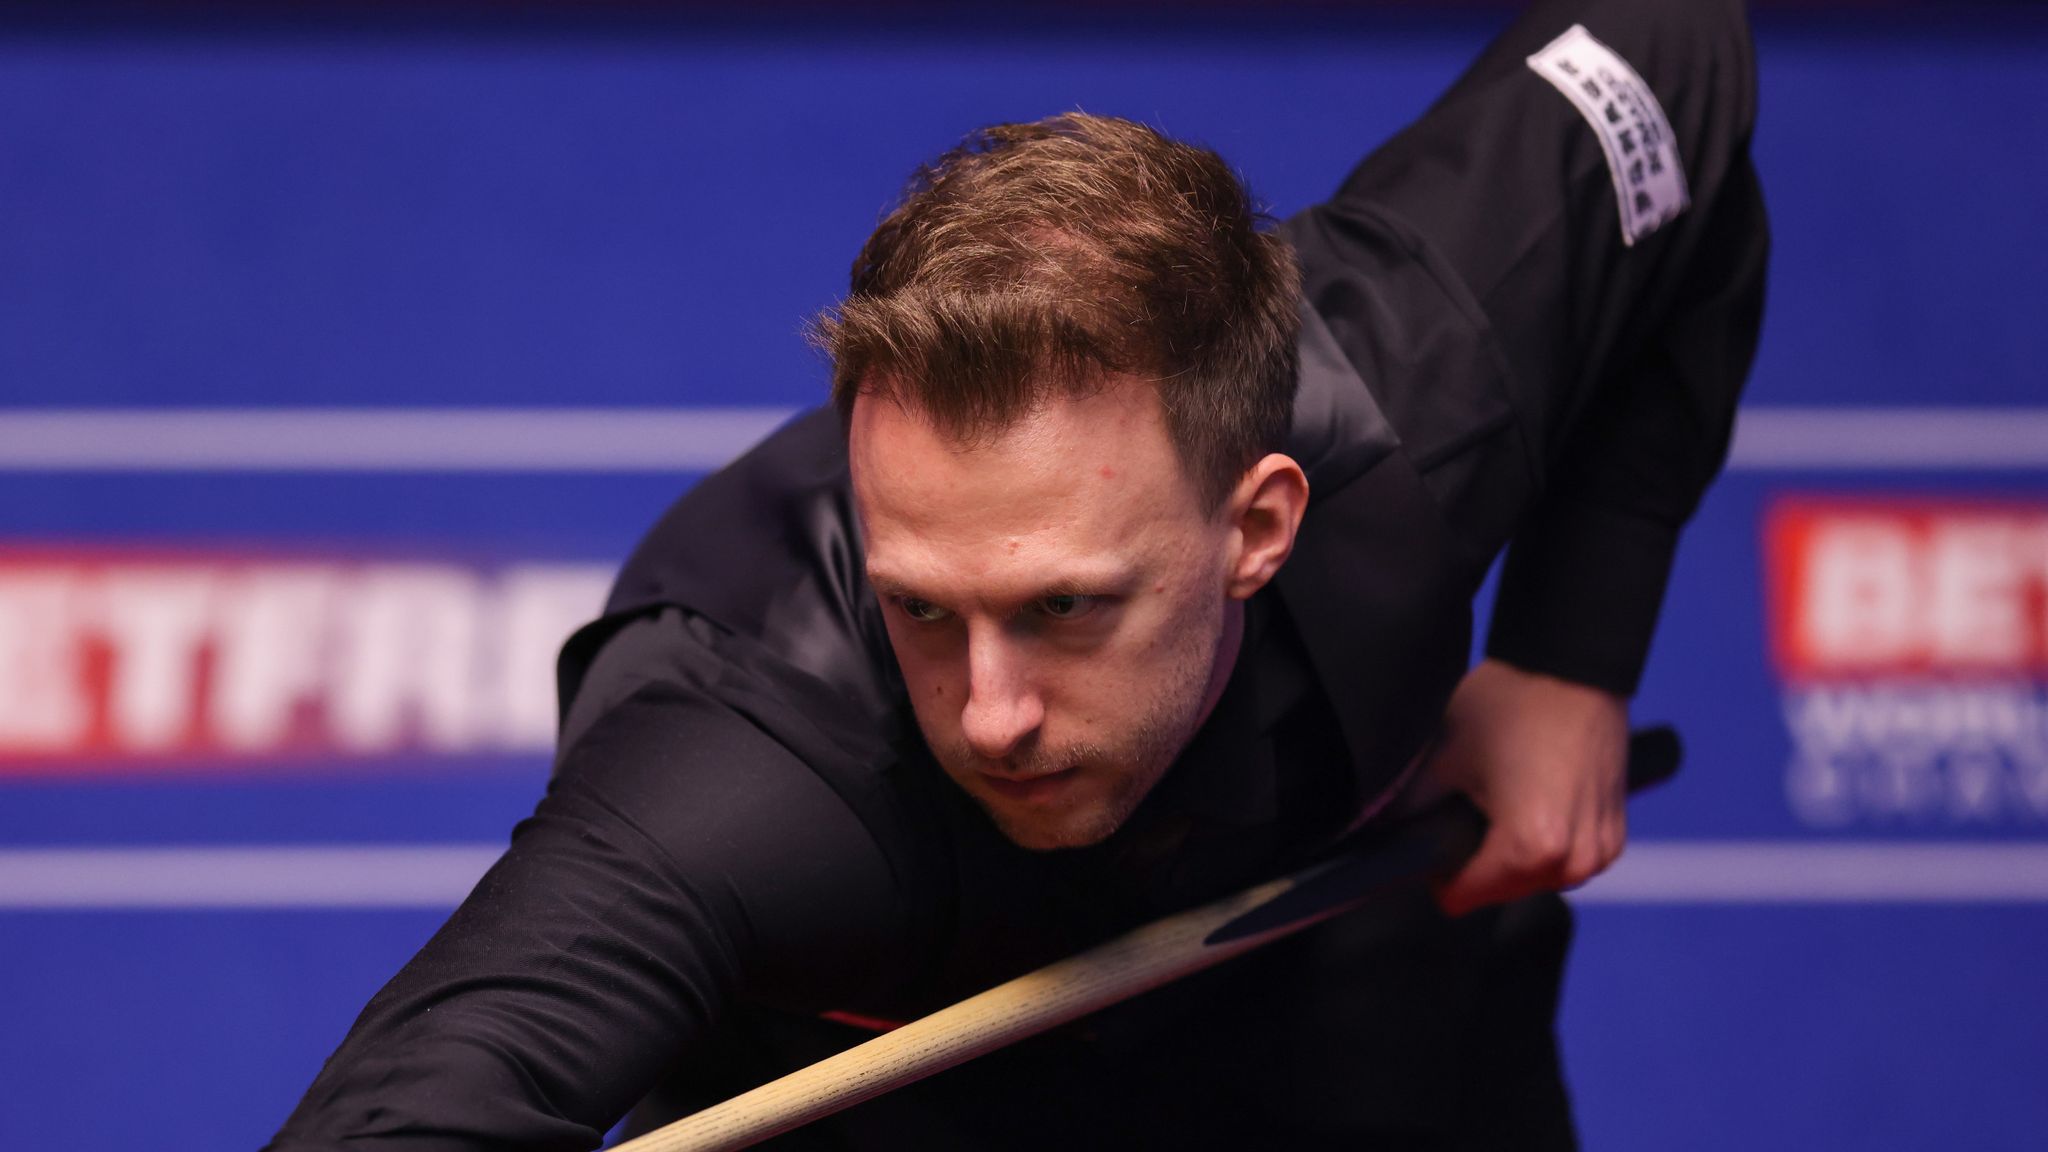 Judd Trump whitewashes Joe Magee at US Open on 9-ball pool debut Snooker News Sky Sports